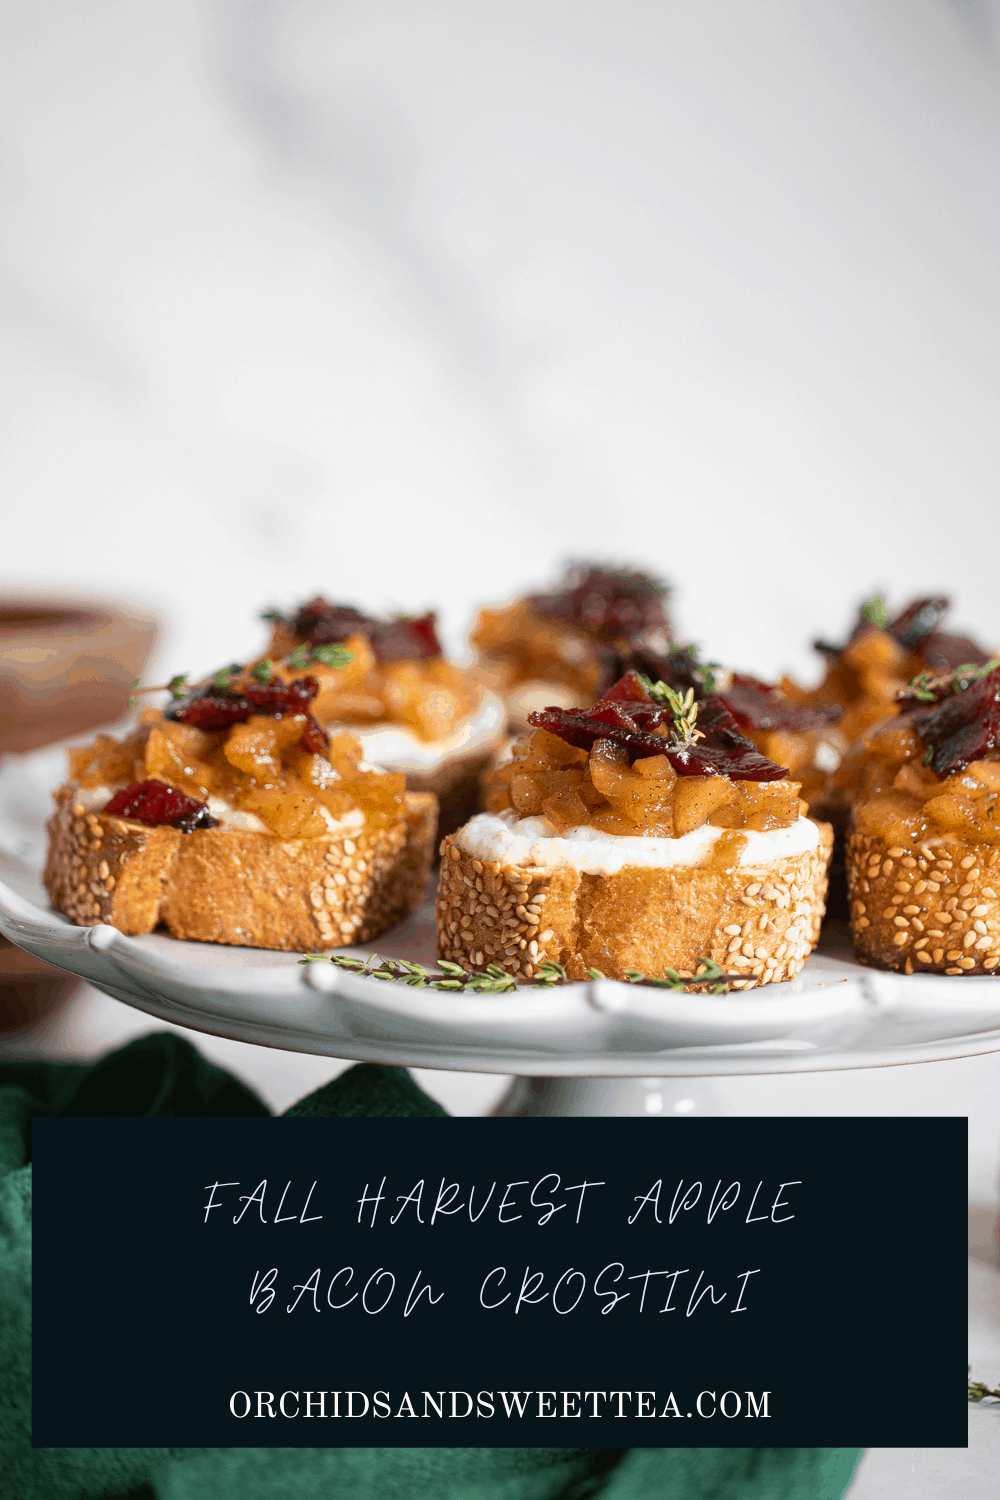 Picture of crostini with text: \"Fall Harvest Apple Bacon Crostini.\"